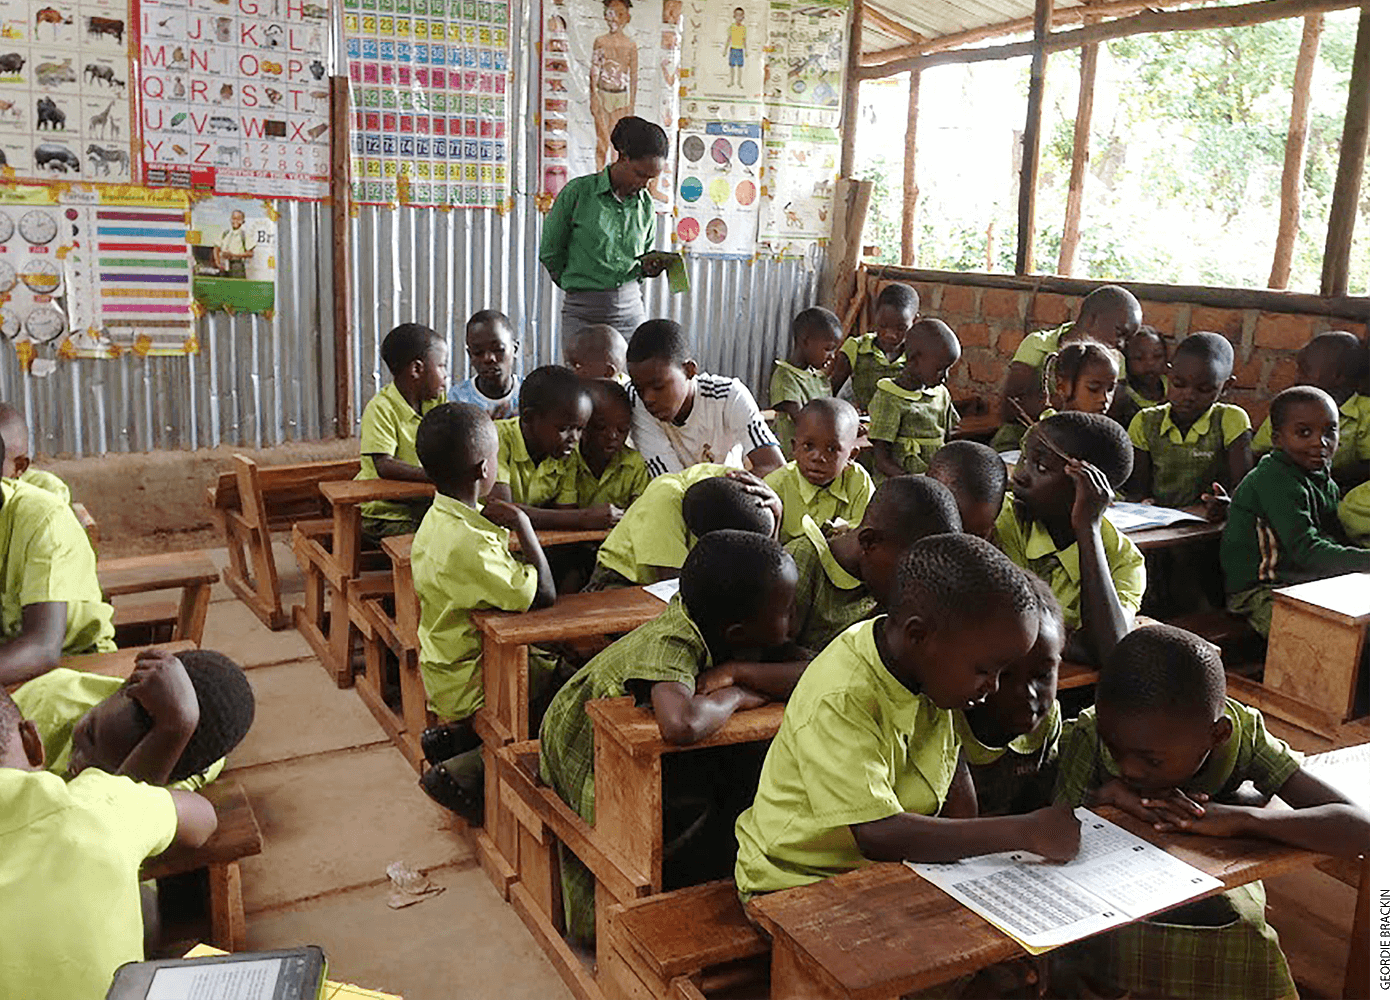 Sixth-grade students tutoring 1st graders in Kenya. In the pilot project, Bridge analysts found that the tutoring drove learning gains in math but not in reading.